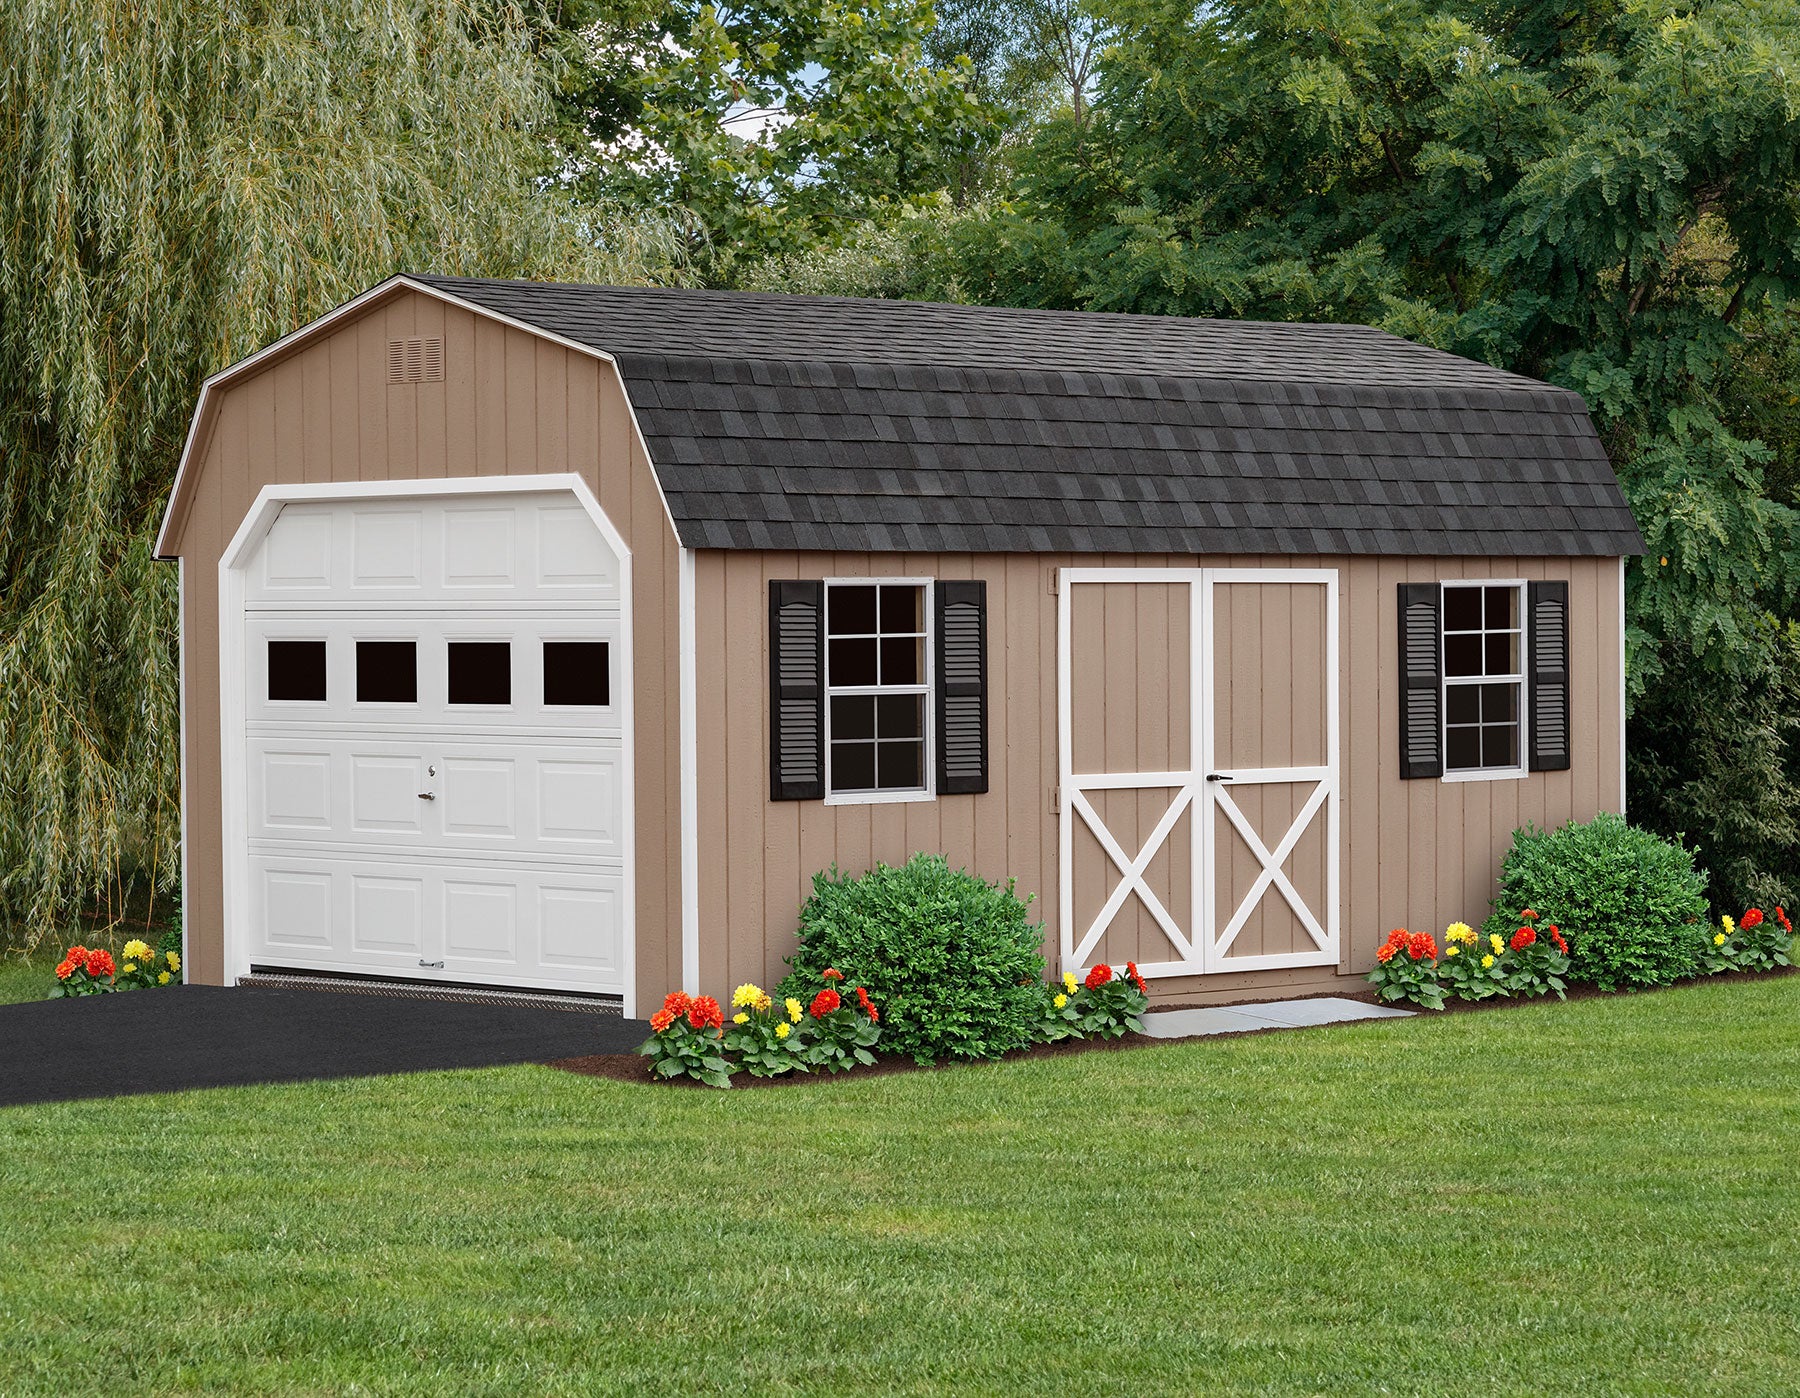 Riehl Quality Storage Barns, Sheds, Garages, and Gazebos in PA